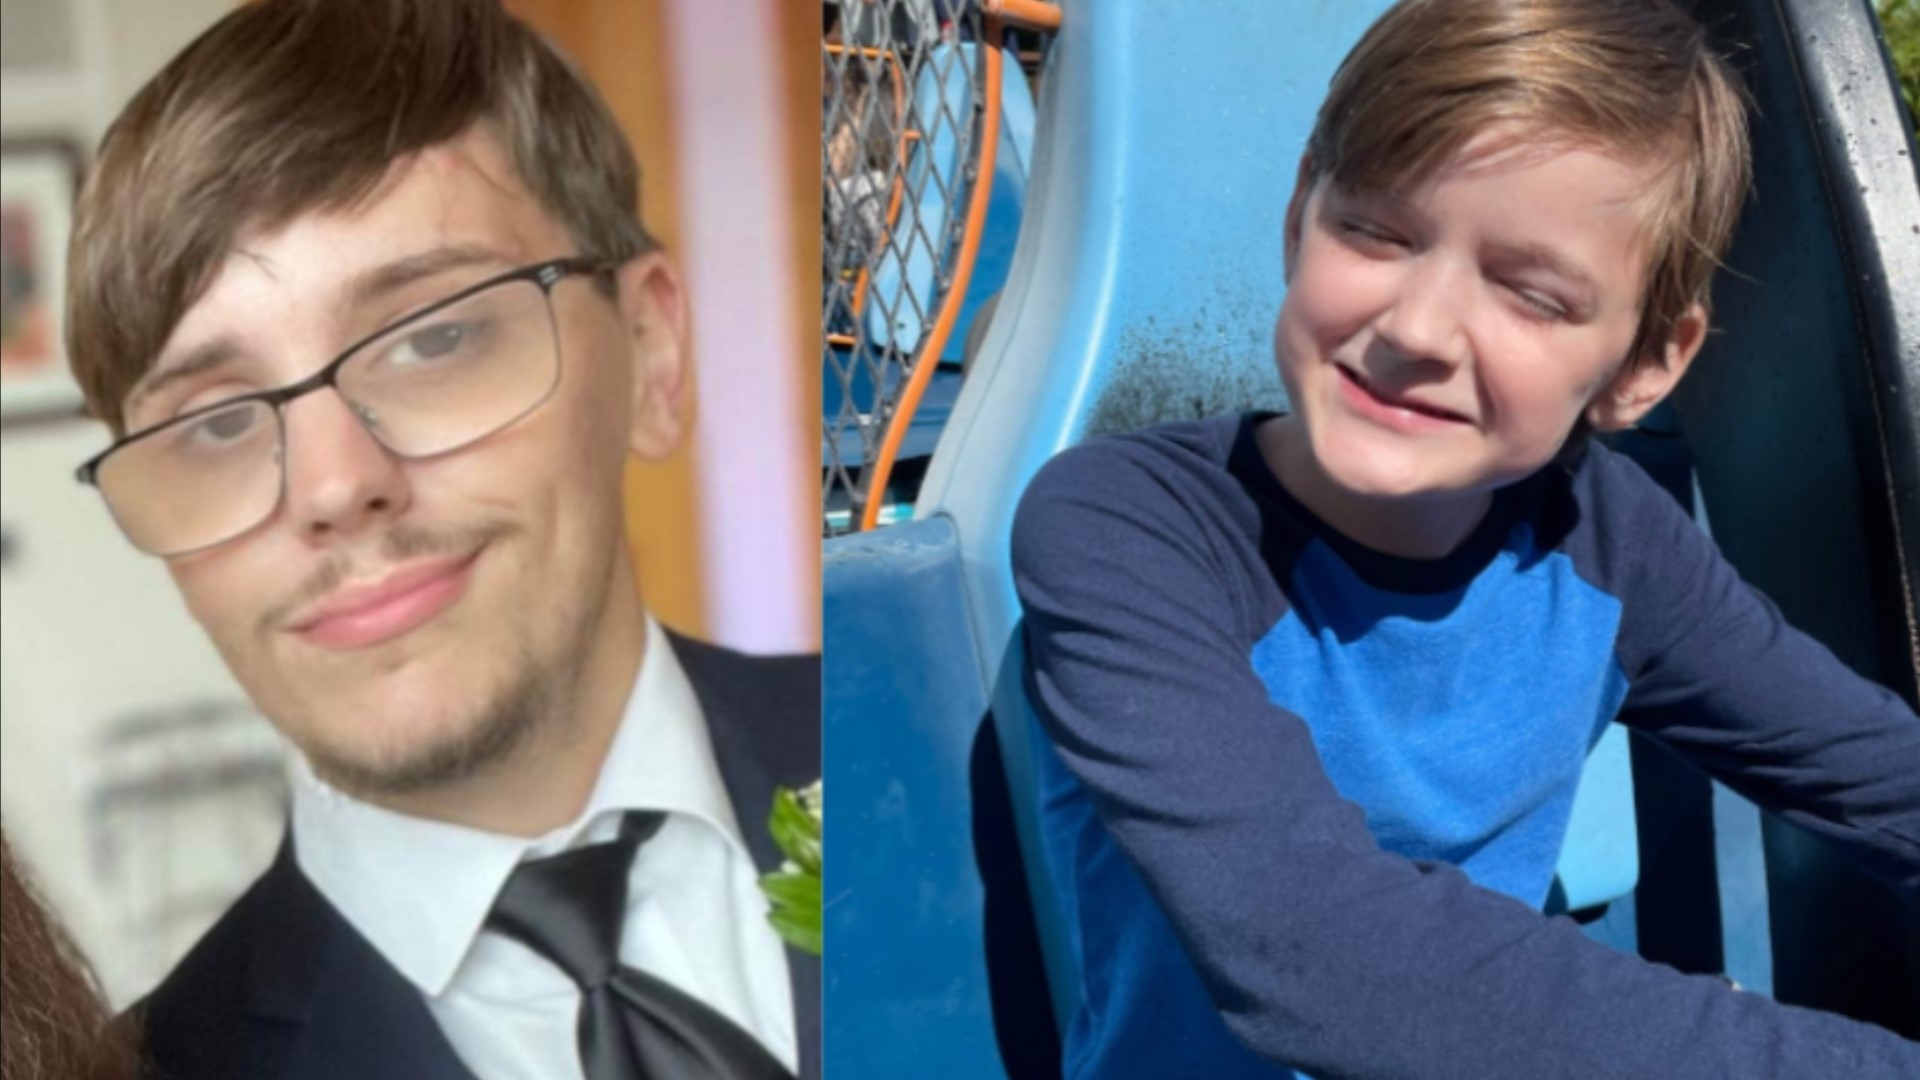 Dalton Penkacik was killed in a hit-and-run early Friday morning. His brother, 12-year-old Brighton Penkacik, also died after being struck by a car on Sept. 1.